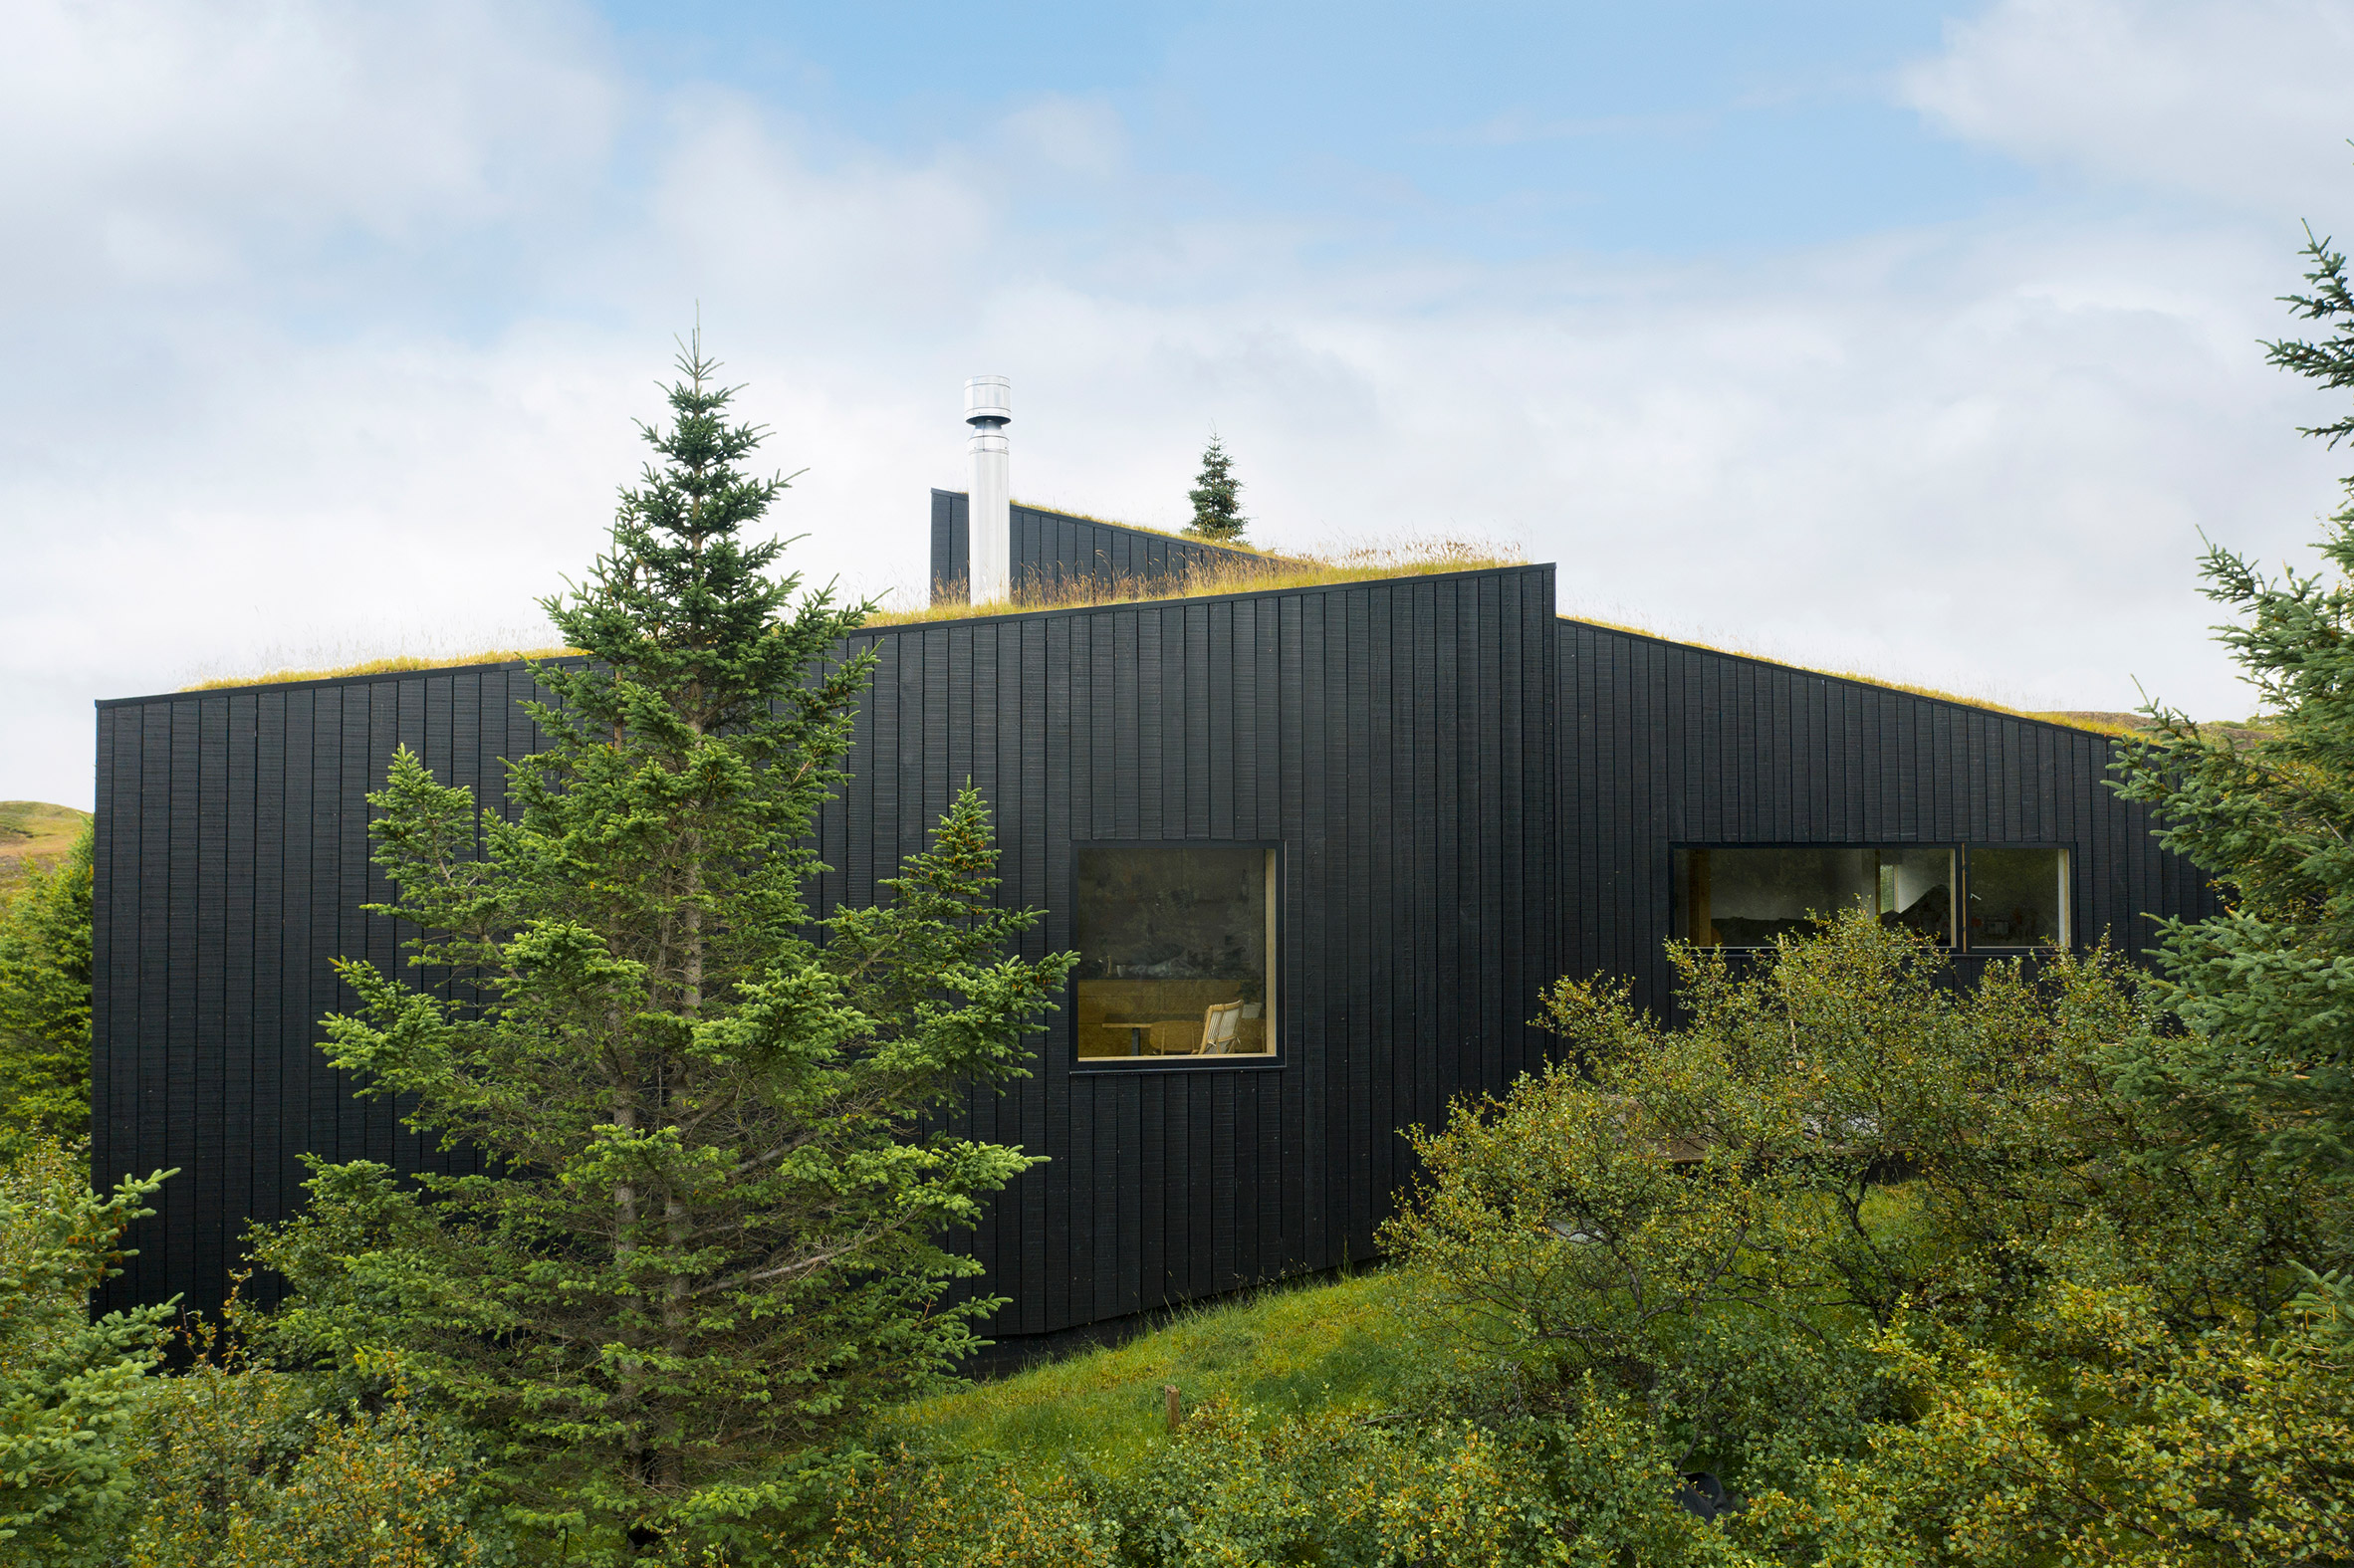 A holiday home with blackened-wood cladding